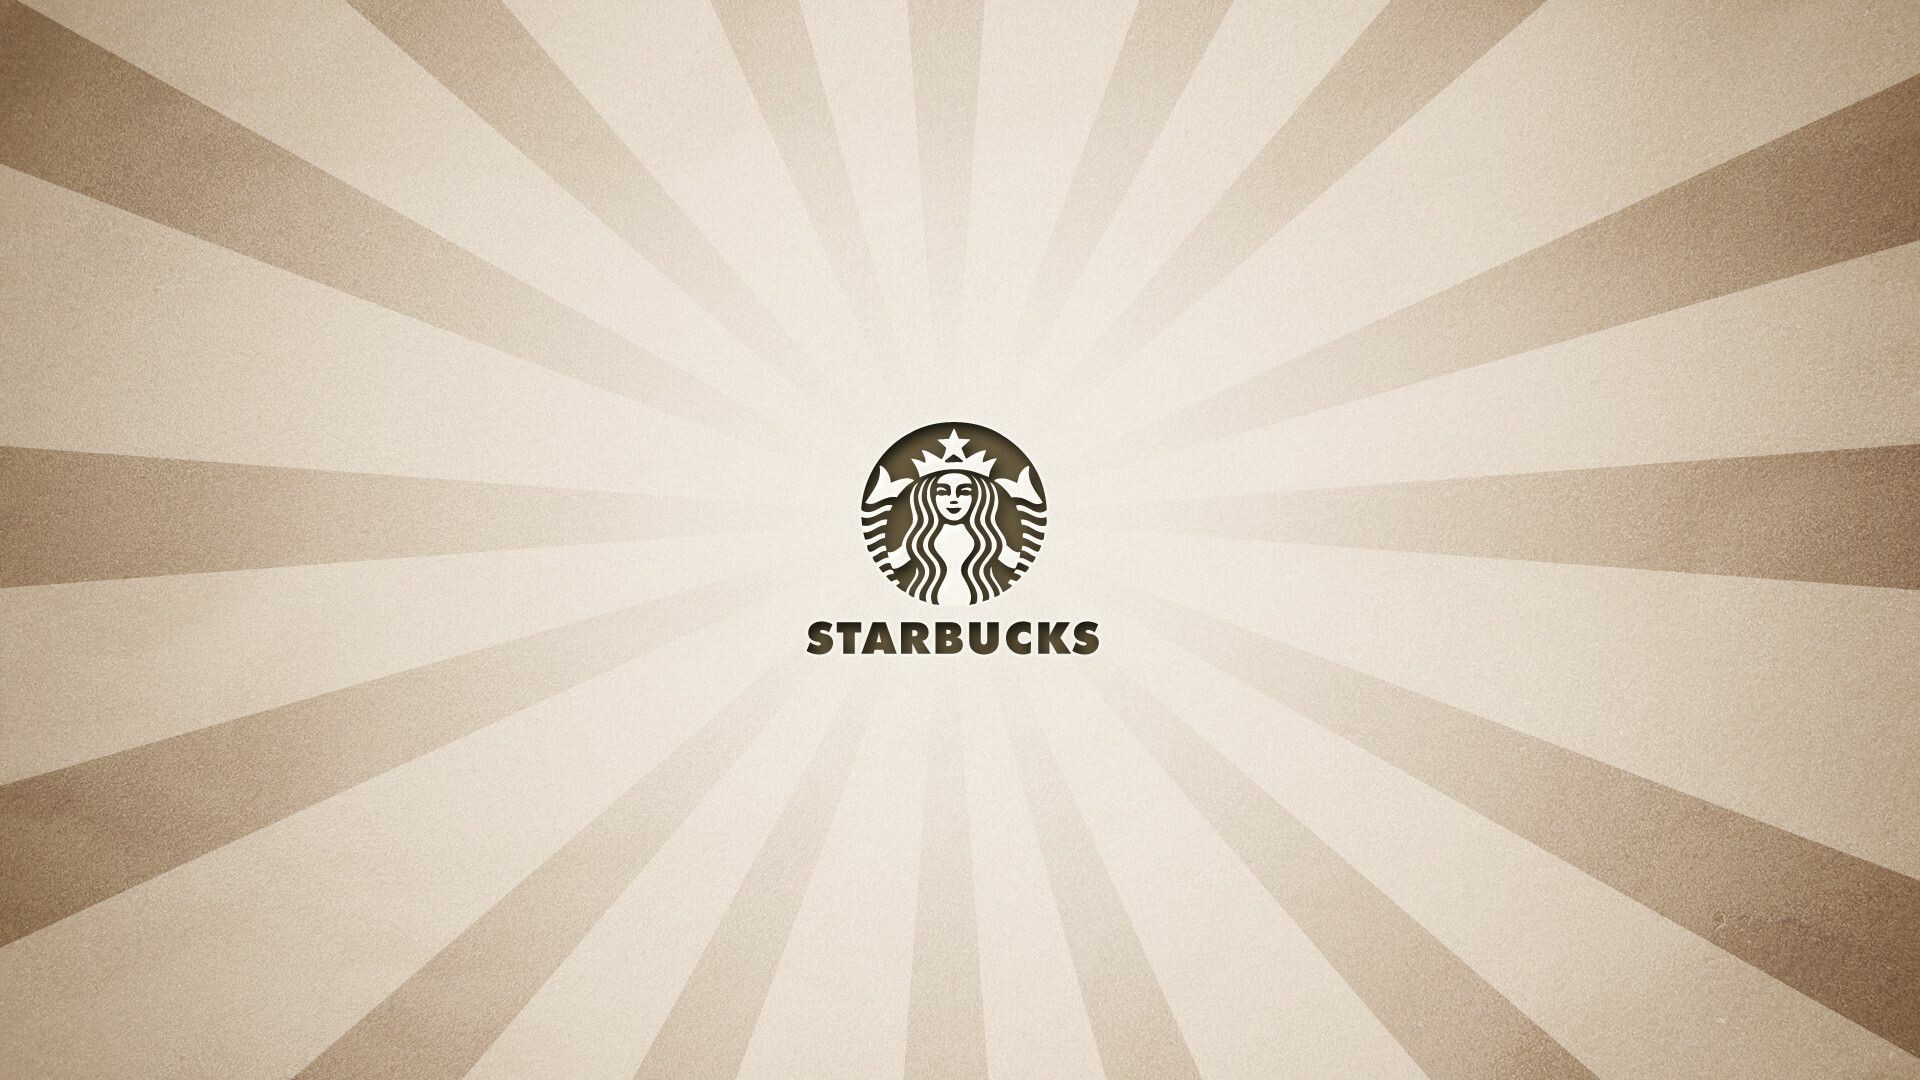 Starbucks: An international restaurant chain that retails handcrafted coffee, tea, and fresh food items. 1920x1080 Full HD Wallpaper.